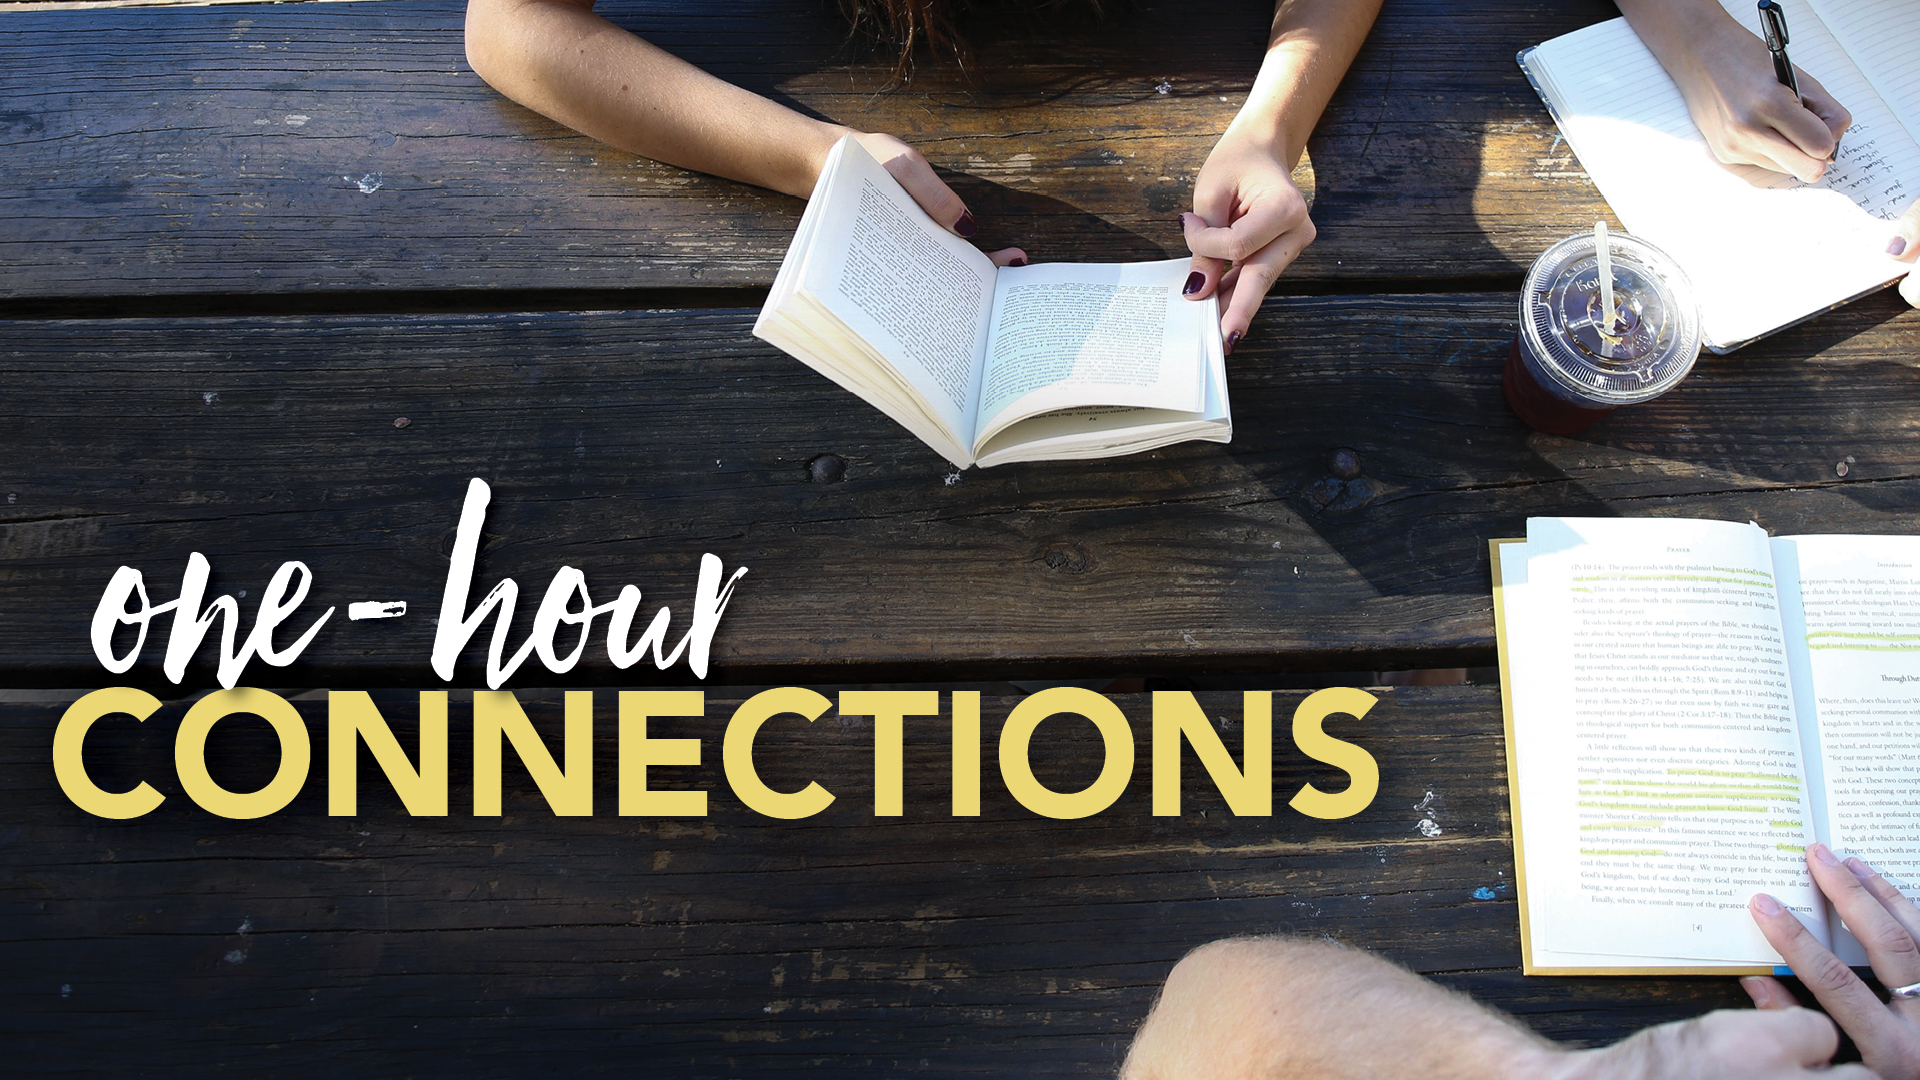 One-Hour Connections
Sundays | 8:30–9:30 a.m. | Butterfield
